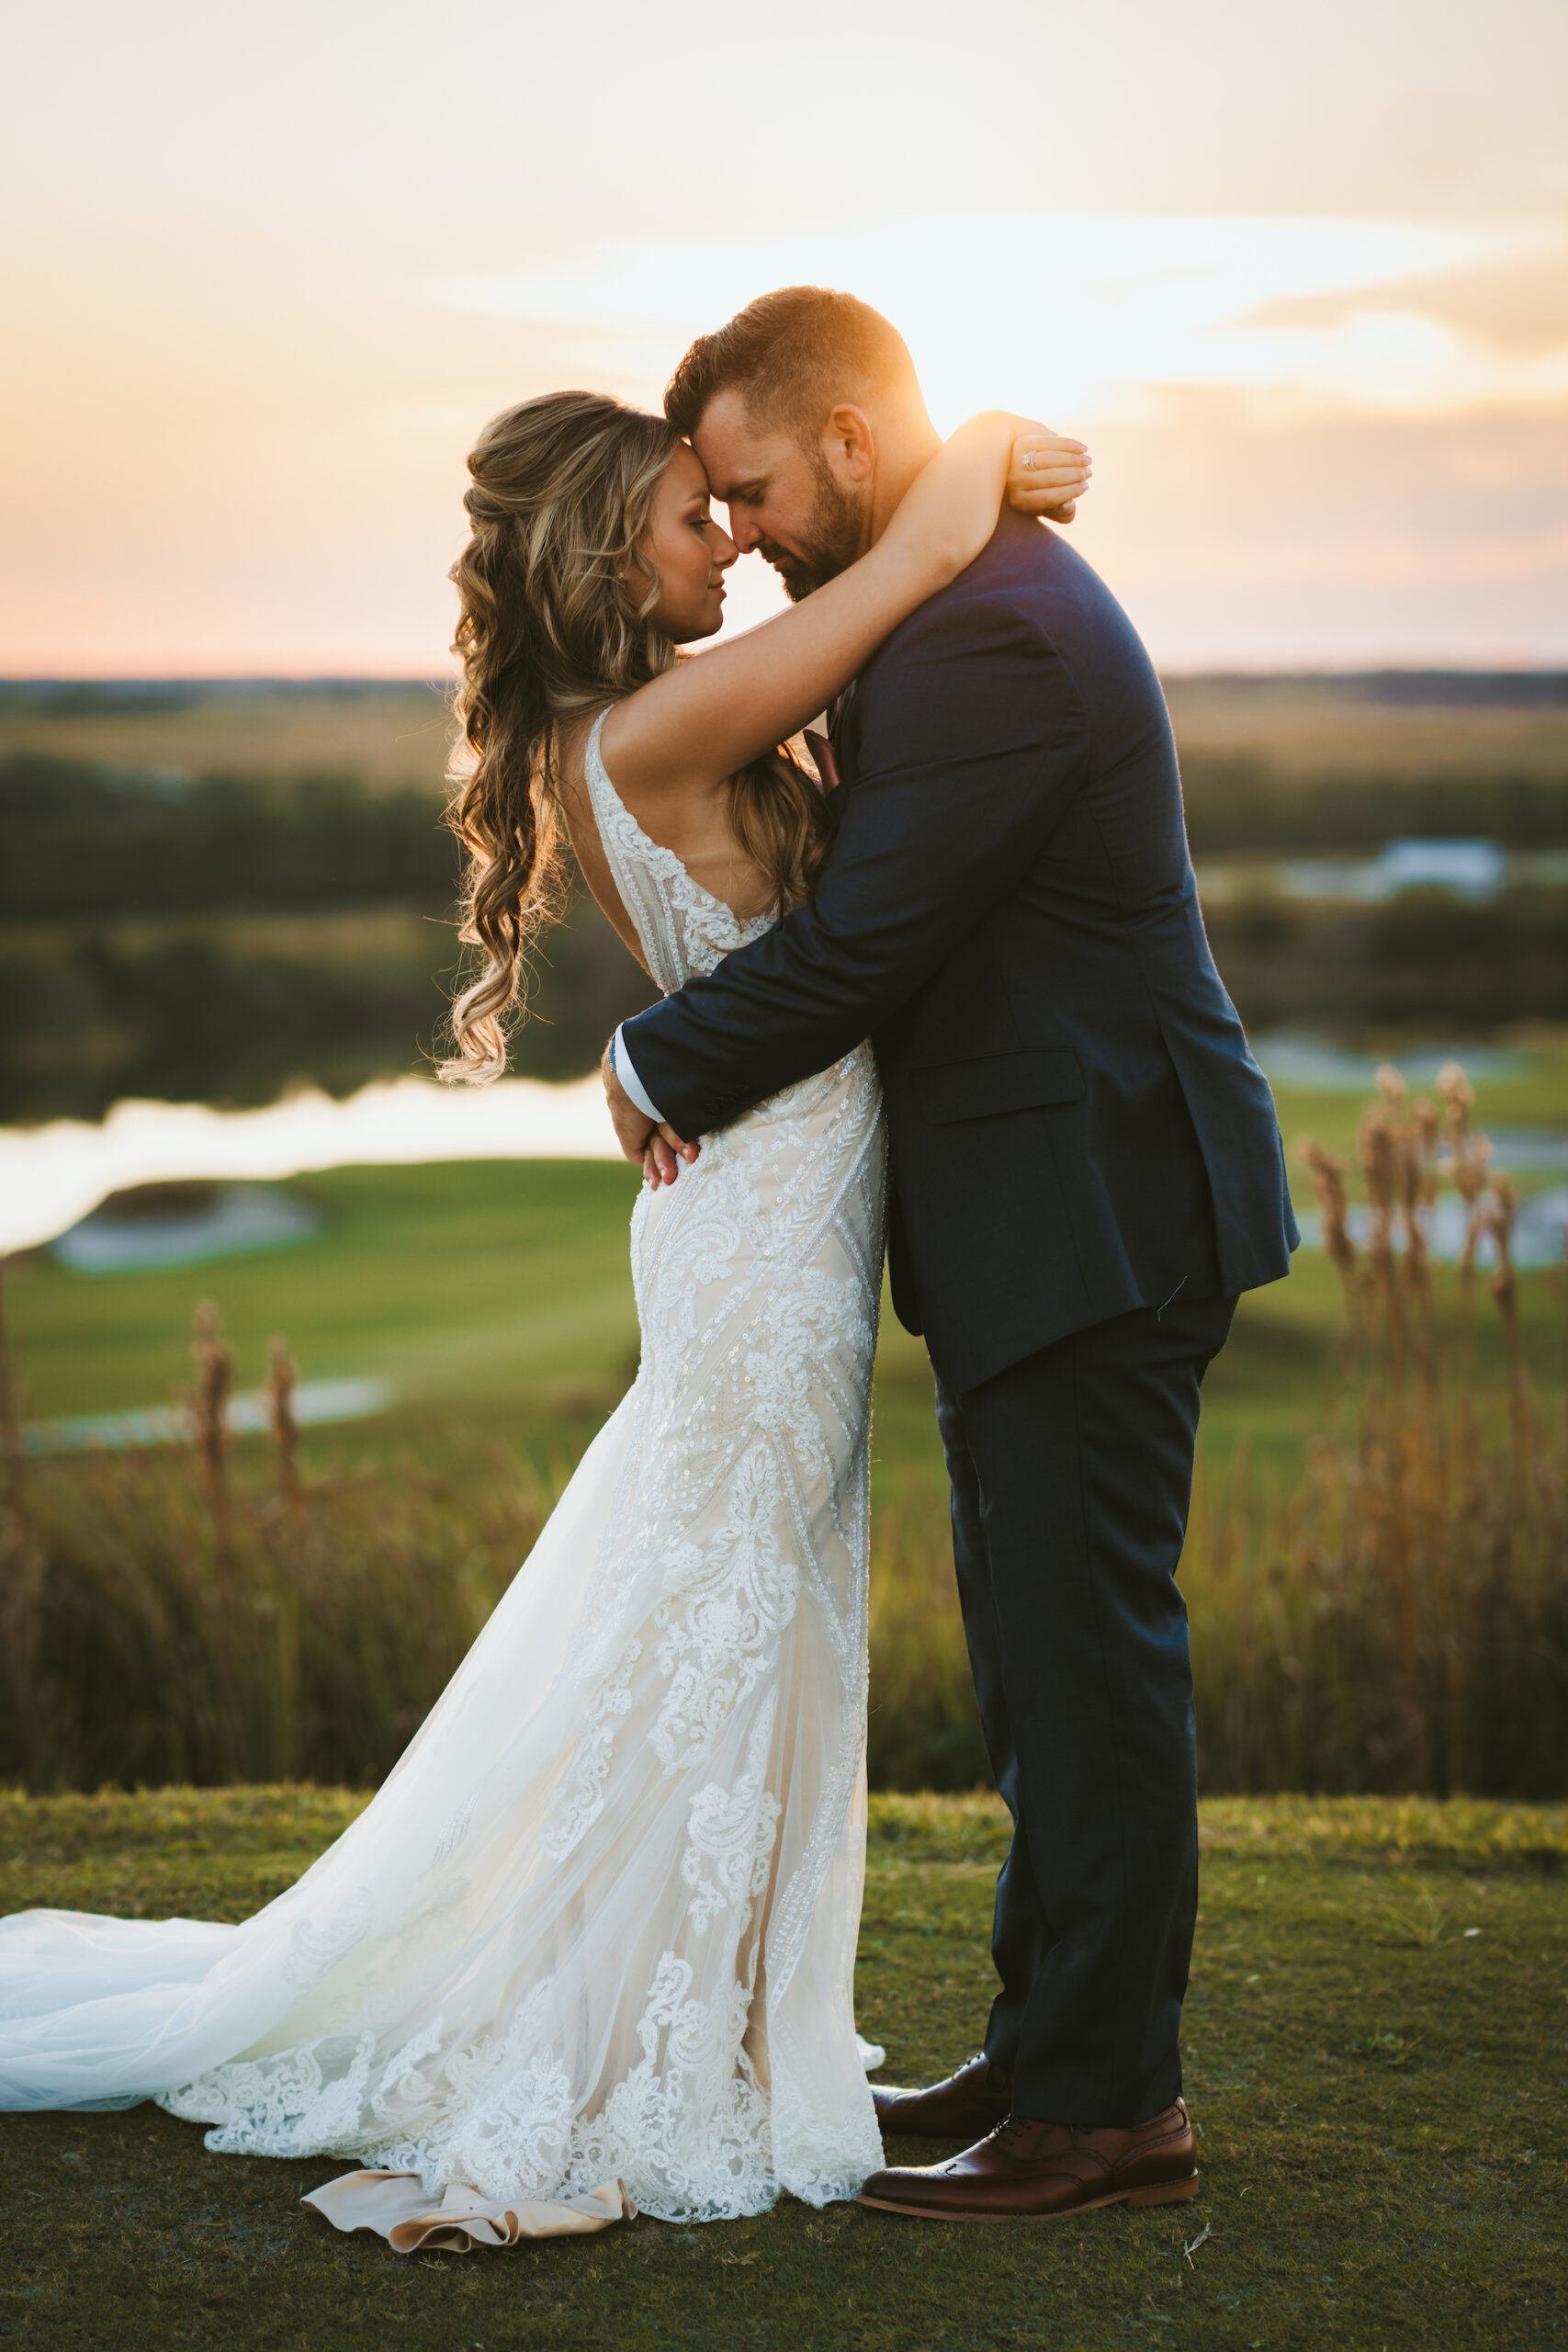 Bride and Groom Intimate Forehead Touch Golf Course Wedding Portrait | Tampa Florida Photographer Mars and The Moon Films